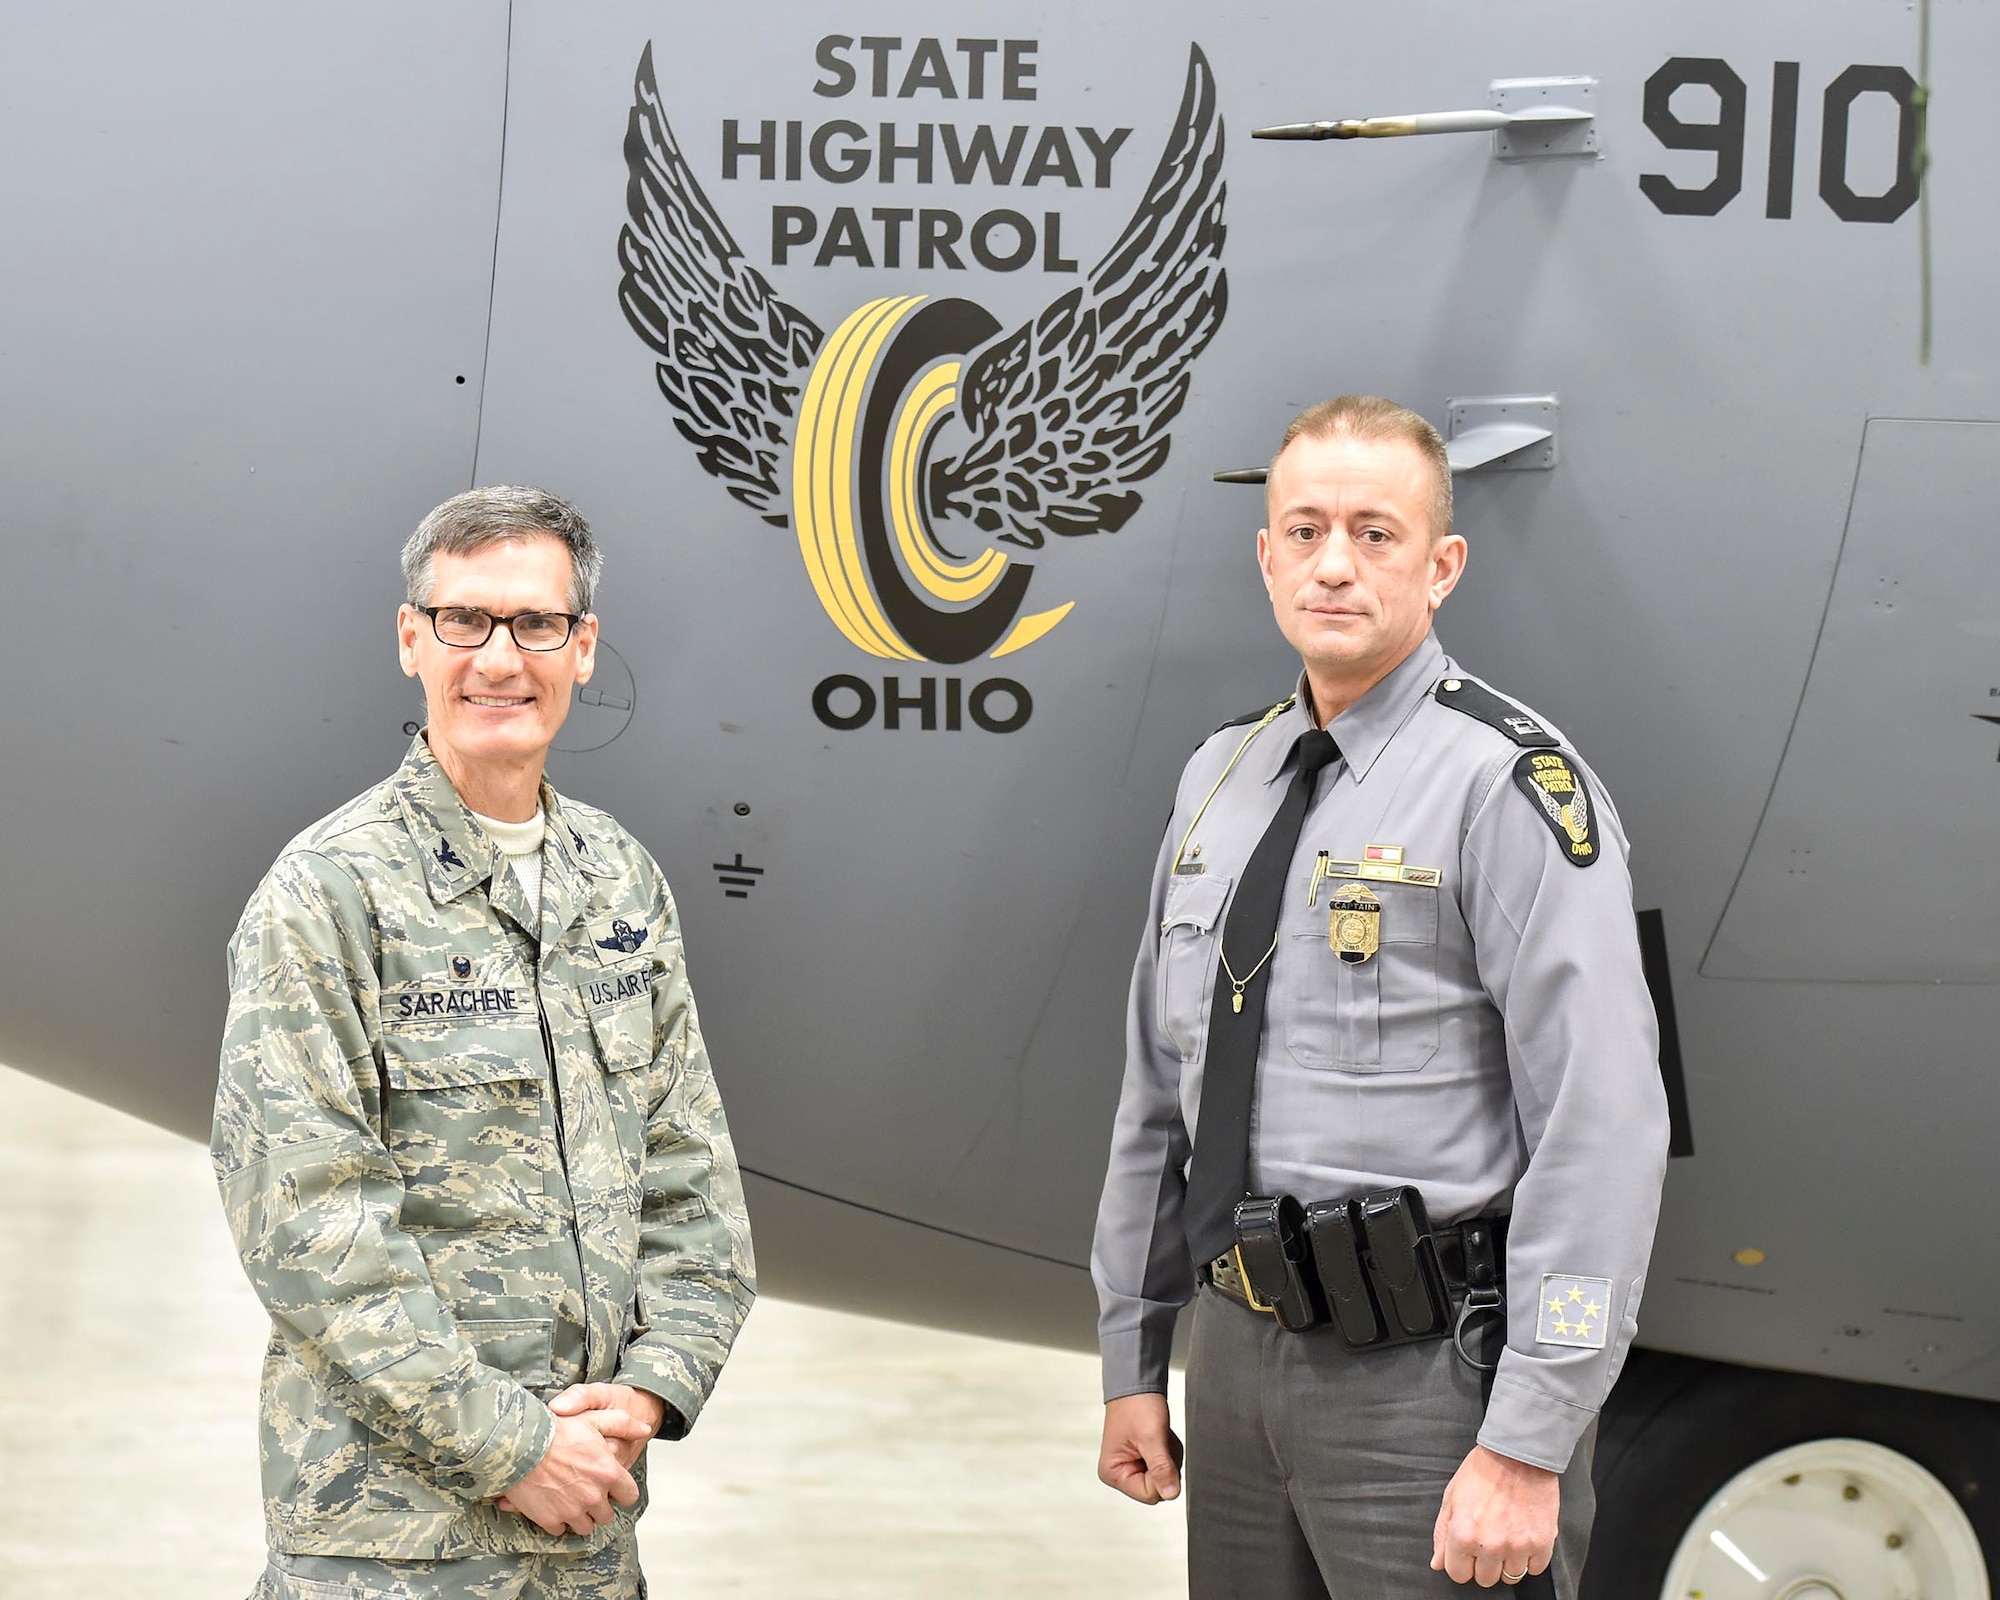 The nose art further signifies the partnership between Youngstown Air Reserve Station with state and local law enforcement agencies.